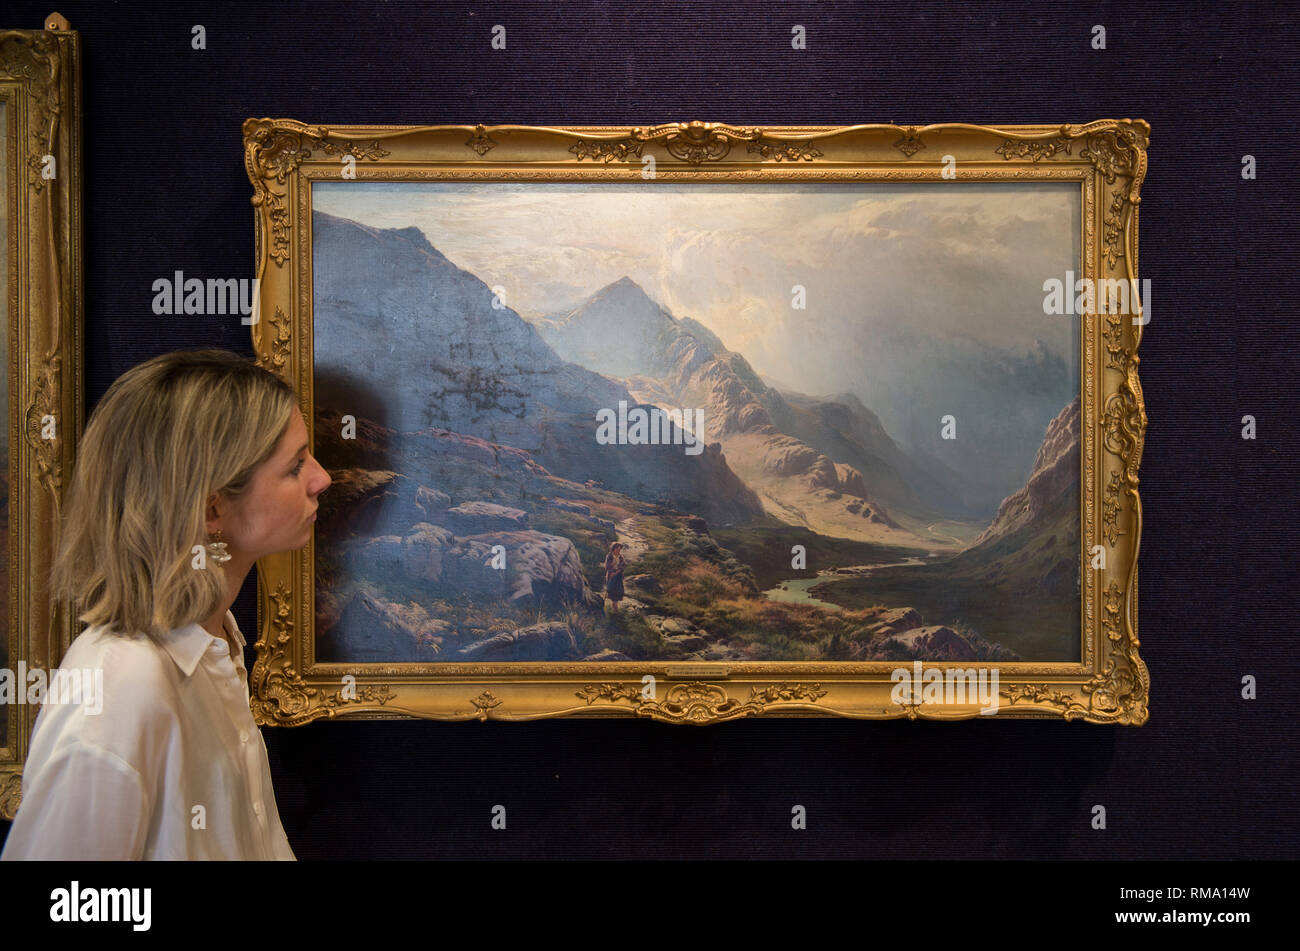 Bonhams, New Bond Street, London, UK. 14 February, 2019. The Mountain Pass by Sidney Richard Percy on view at Bonhams New Bond Street saleroom in the 19th Century European, Victorian and British Impressionist Art sale preview. It has an estimate of £15,000-20,000. Credit: Malcolm Park/Alamy Live News. Stock Photo